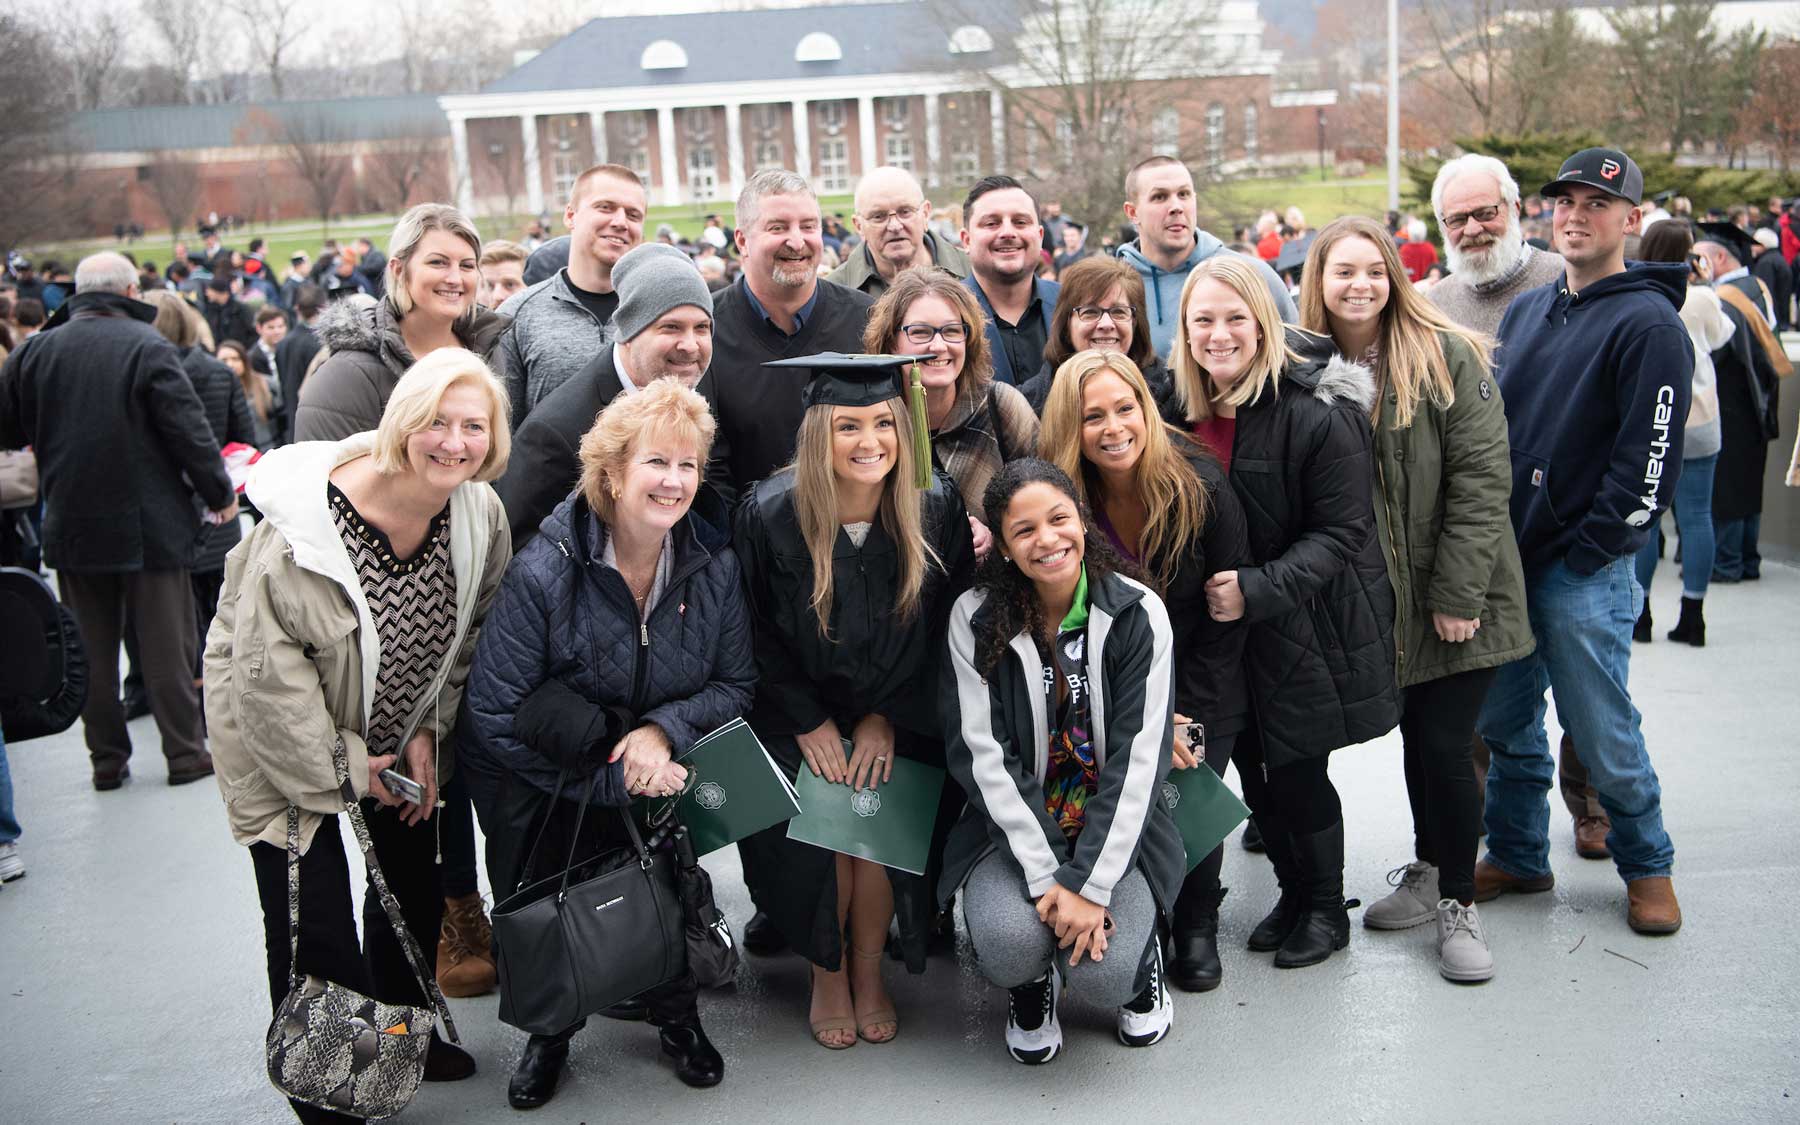 Graduate poses with her family and friends after Fall Commencement.